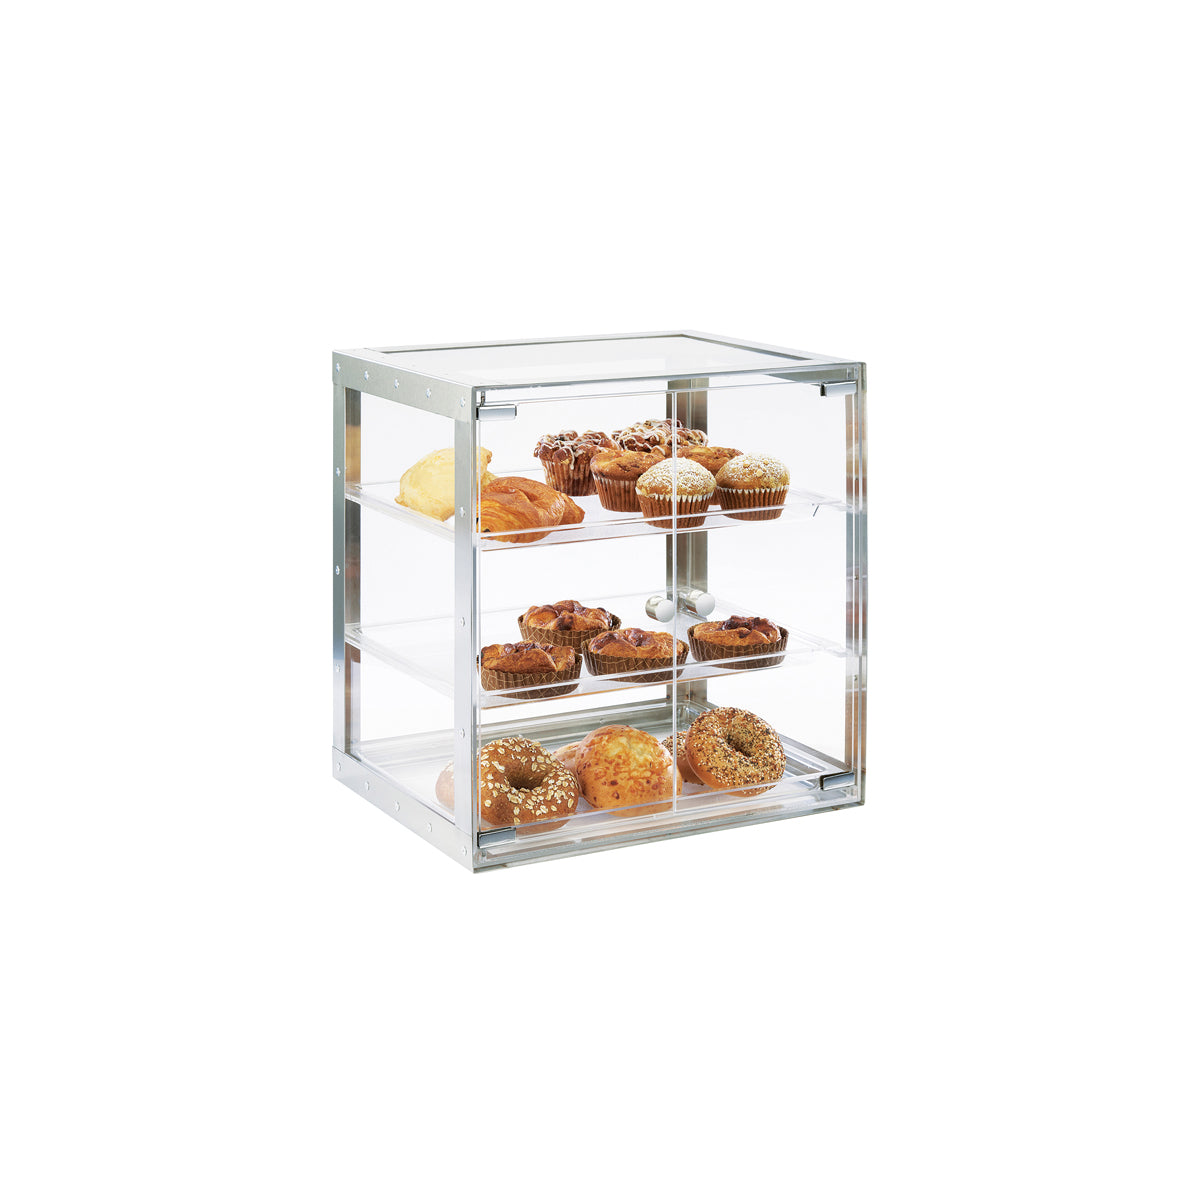 CM3413-55 Cal-Mil Urban Collection 3 Tier Bakery Case Stainless Steel 489x362x489mm Tomkin Australia Hospitality Supplies